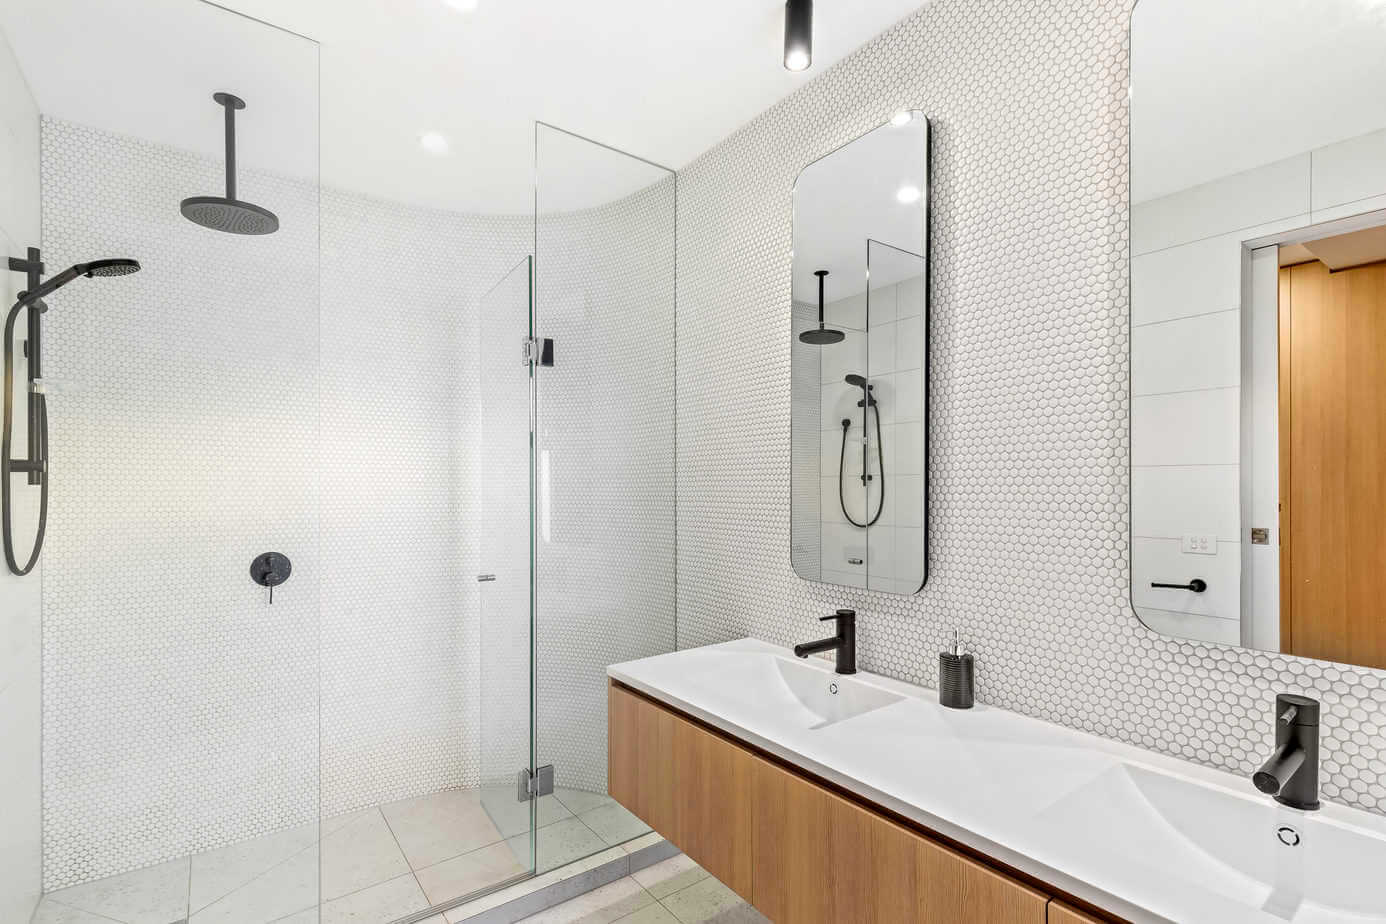 The Cost of a New Bathroom: How Much Should You Expect To Spend?